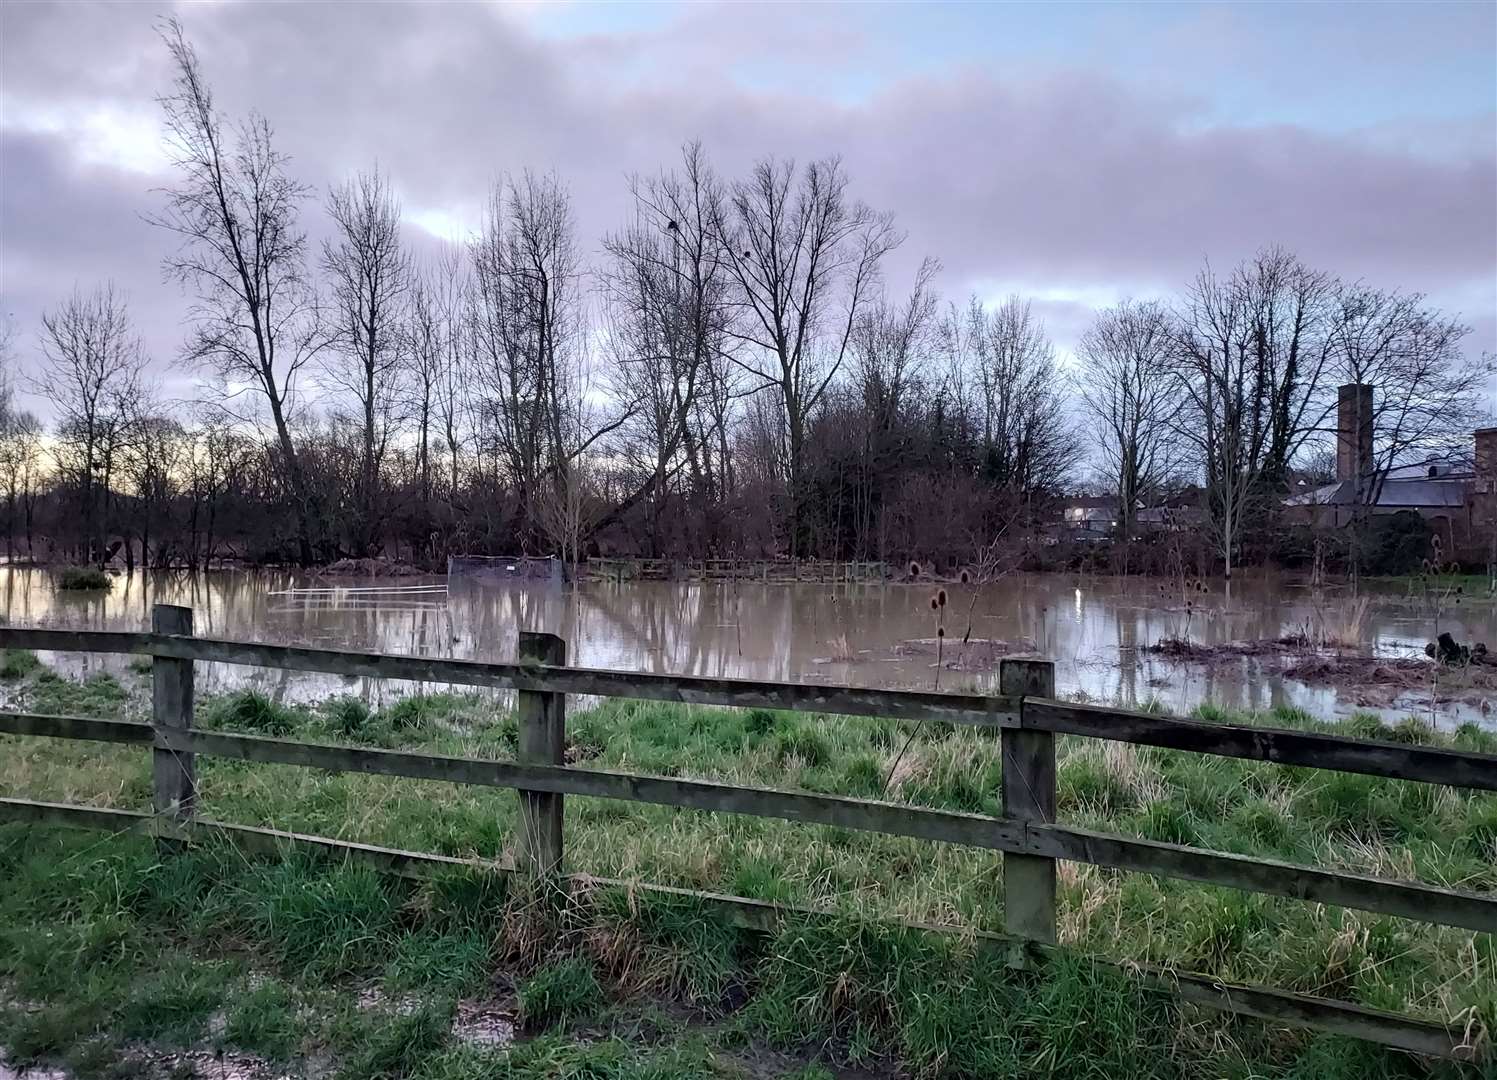 The water meadows next to Kevelaer Way, Bury St Edmunds. Picture: Mariam Ghaemi